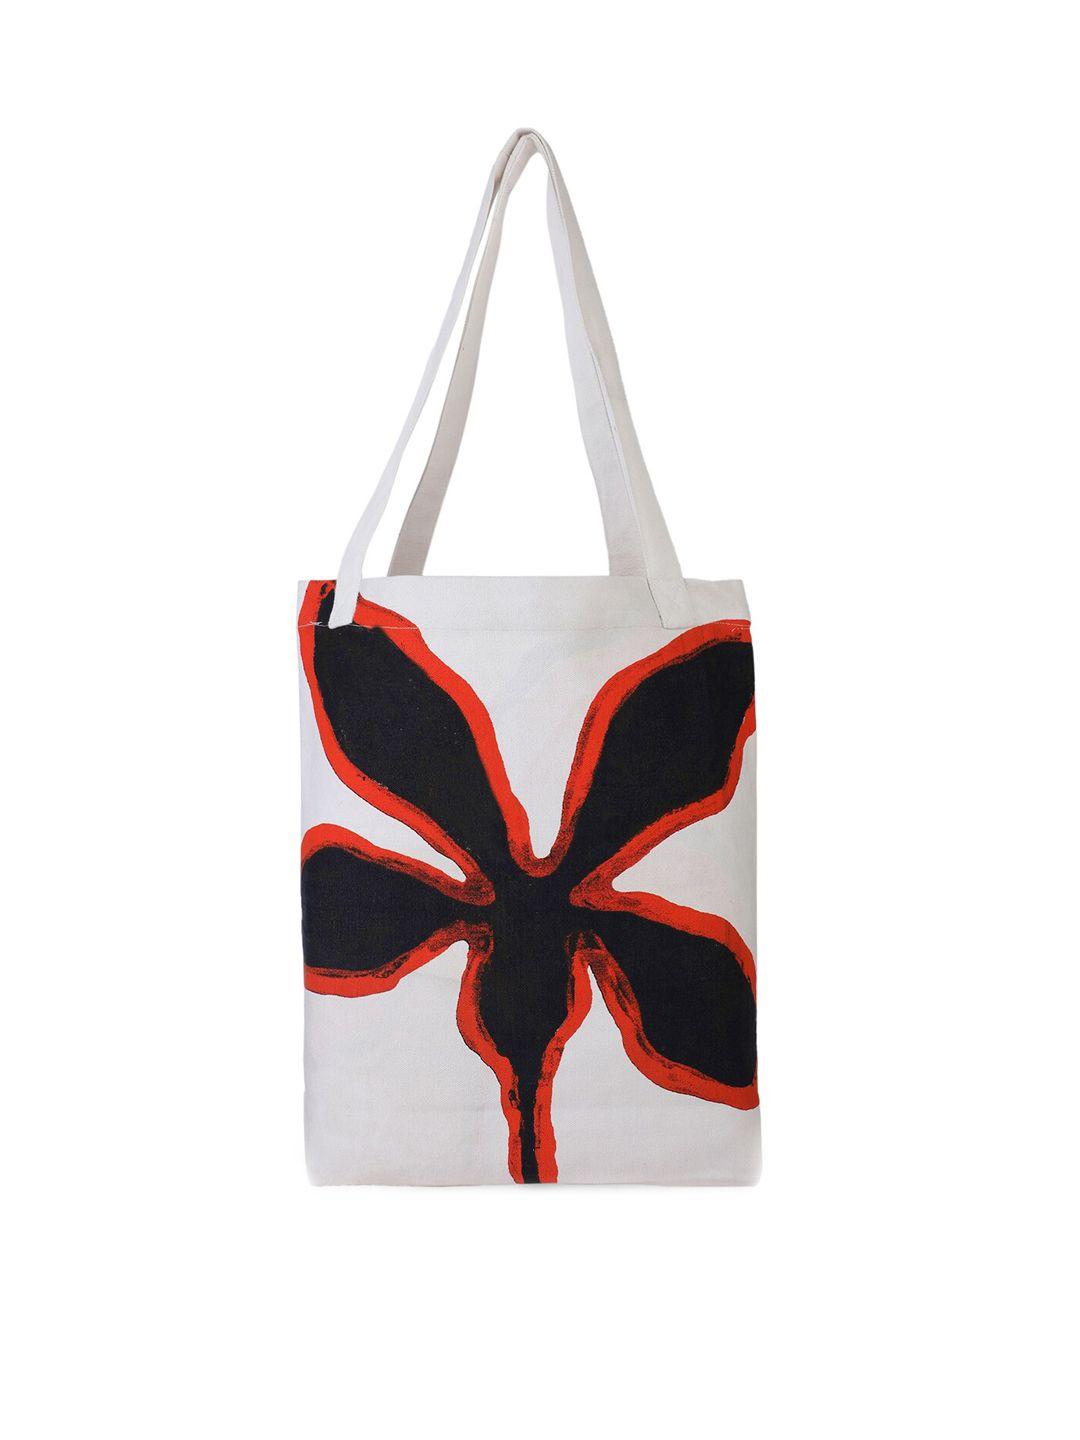 rediscover fashion floral printed structured tote bag